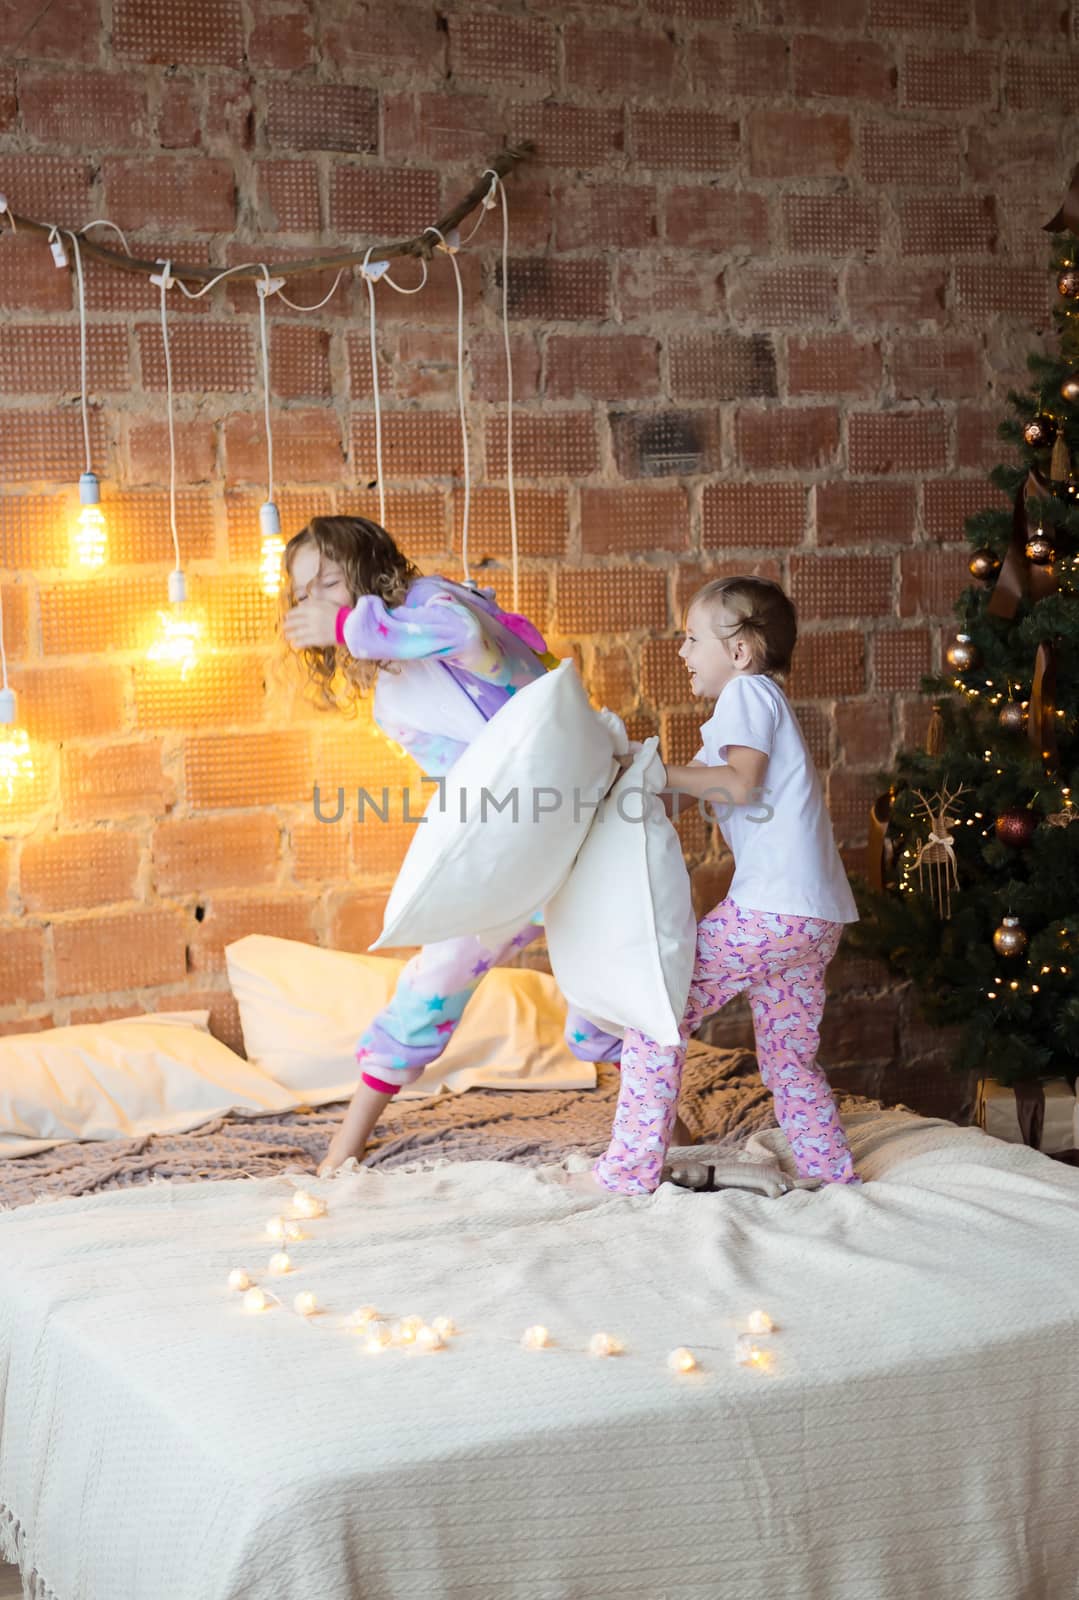 .Little sisters in pajamas on the bed fight with pillows and christmas garlands by galinasharapova